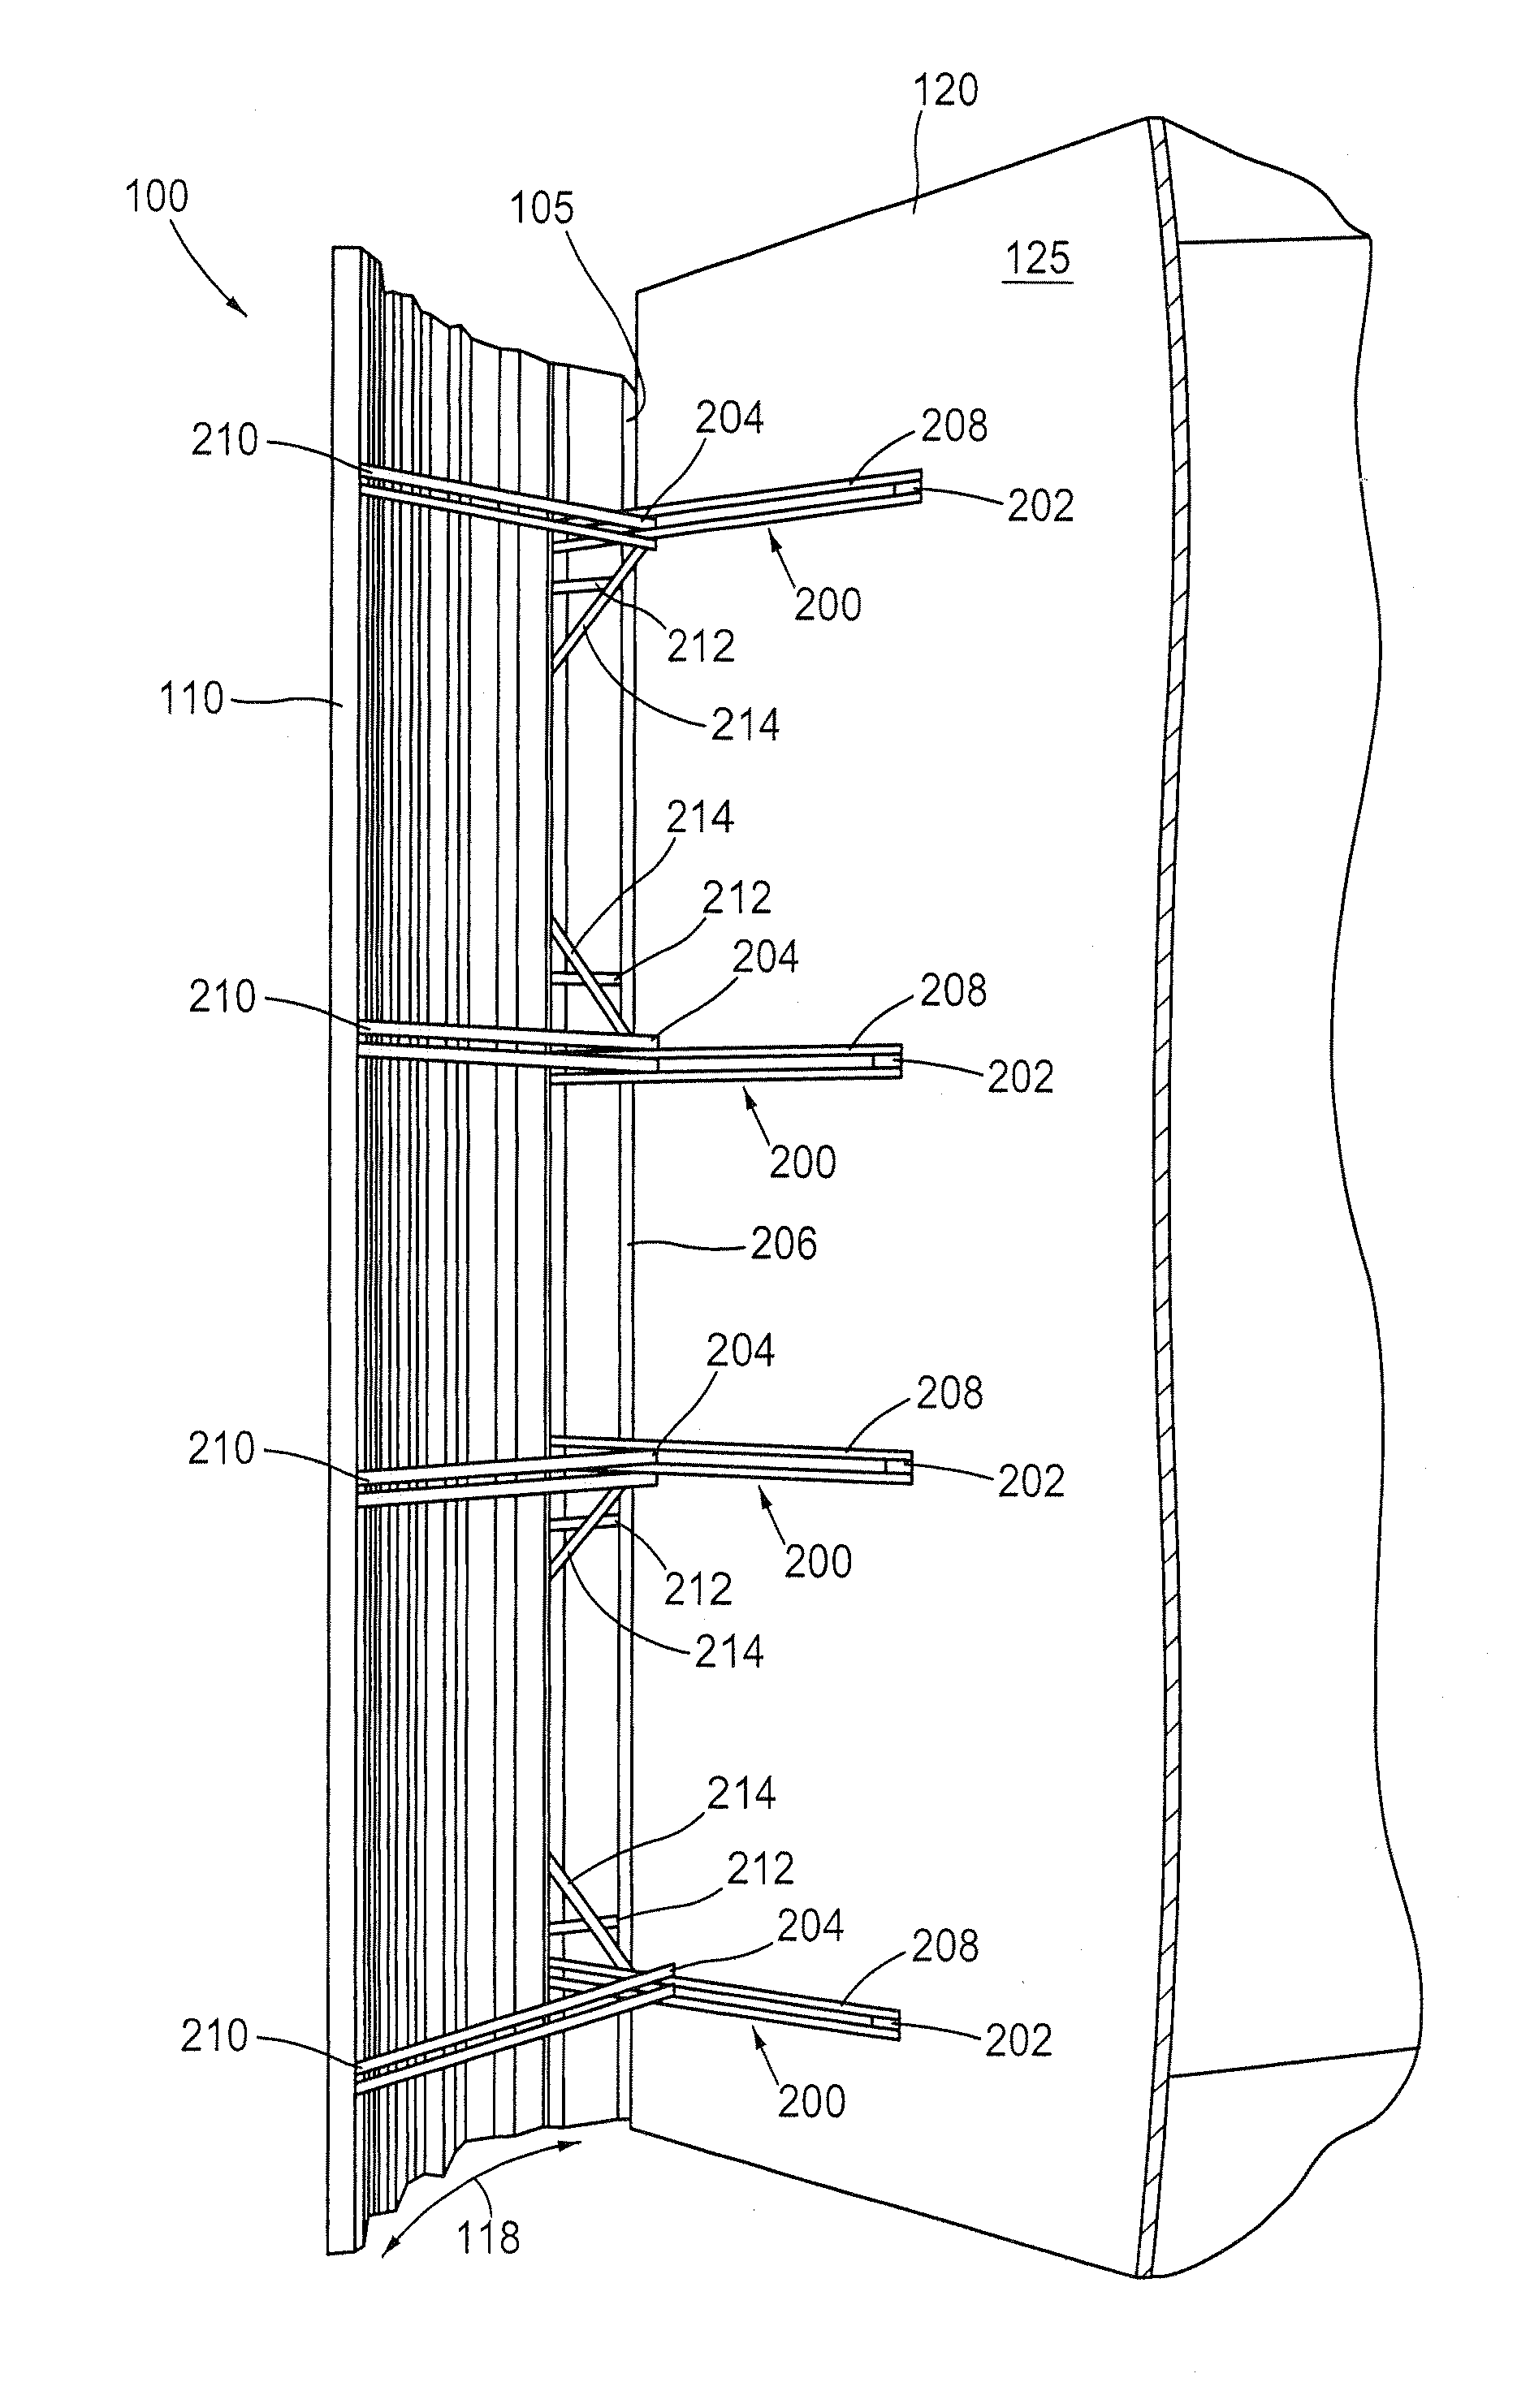 Apparatus for reducing drag on a vehicle